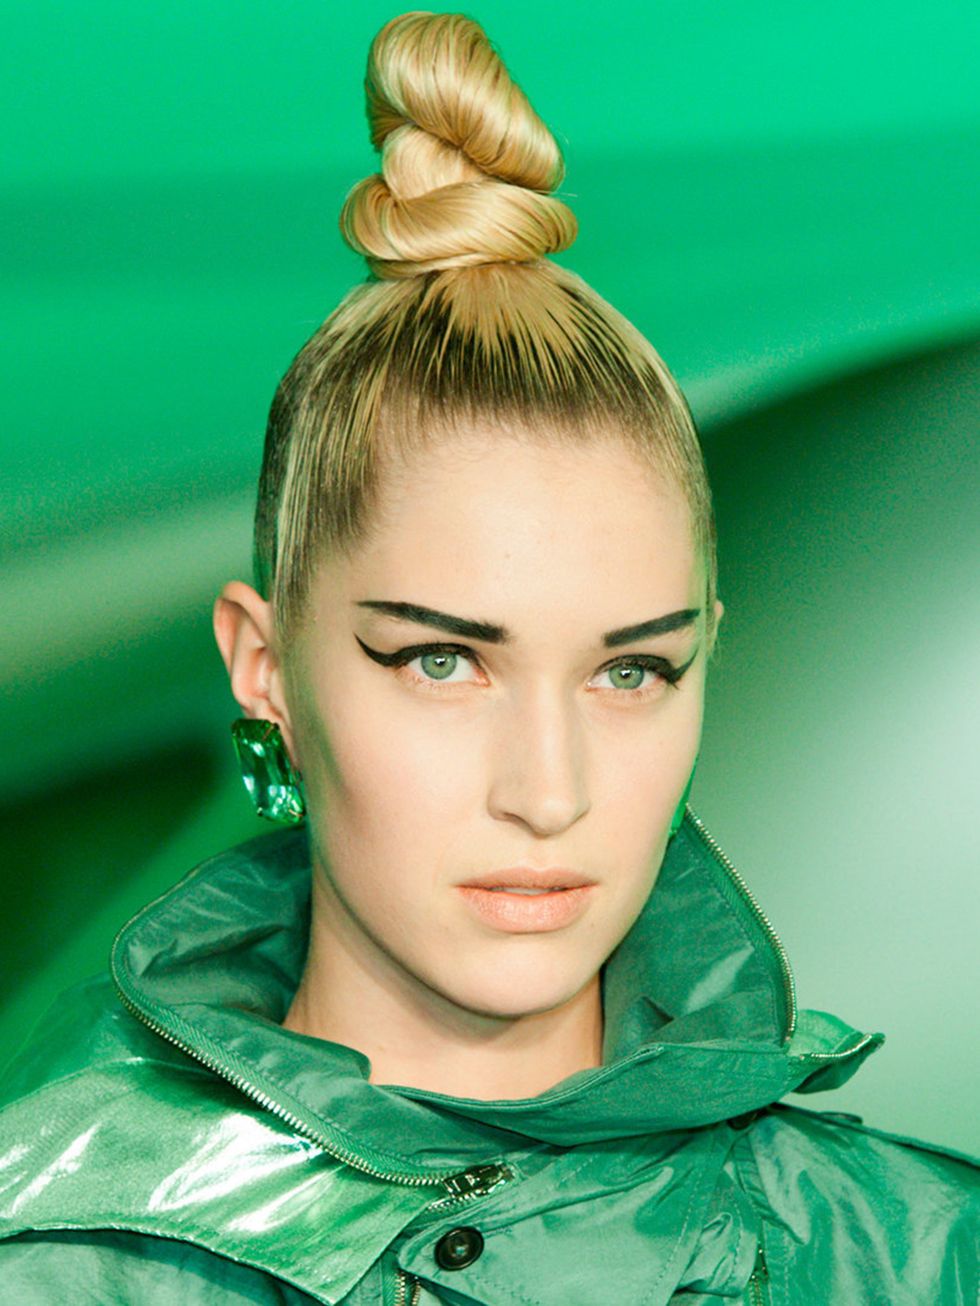 <p>Hair Stylist: Guido for Redken</p><p>Look: Severe topknots</p><p>Inspiration: Futuristic Britain</p><p>Key Product: Redken Hardware 16 Gel</p><p>Tip: Use gel on through your hair to slick back the hair into a sleek twisted topknot.</p>